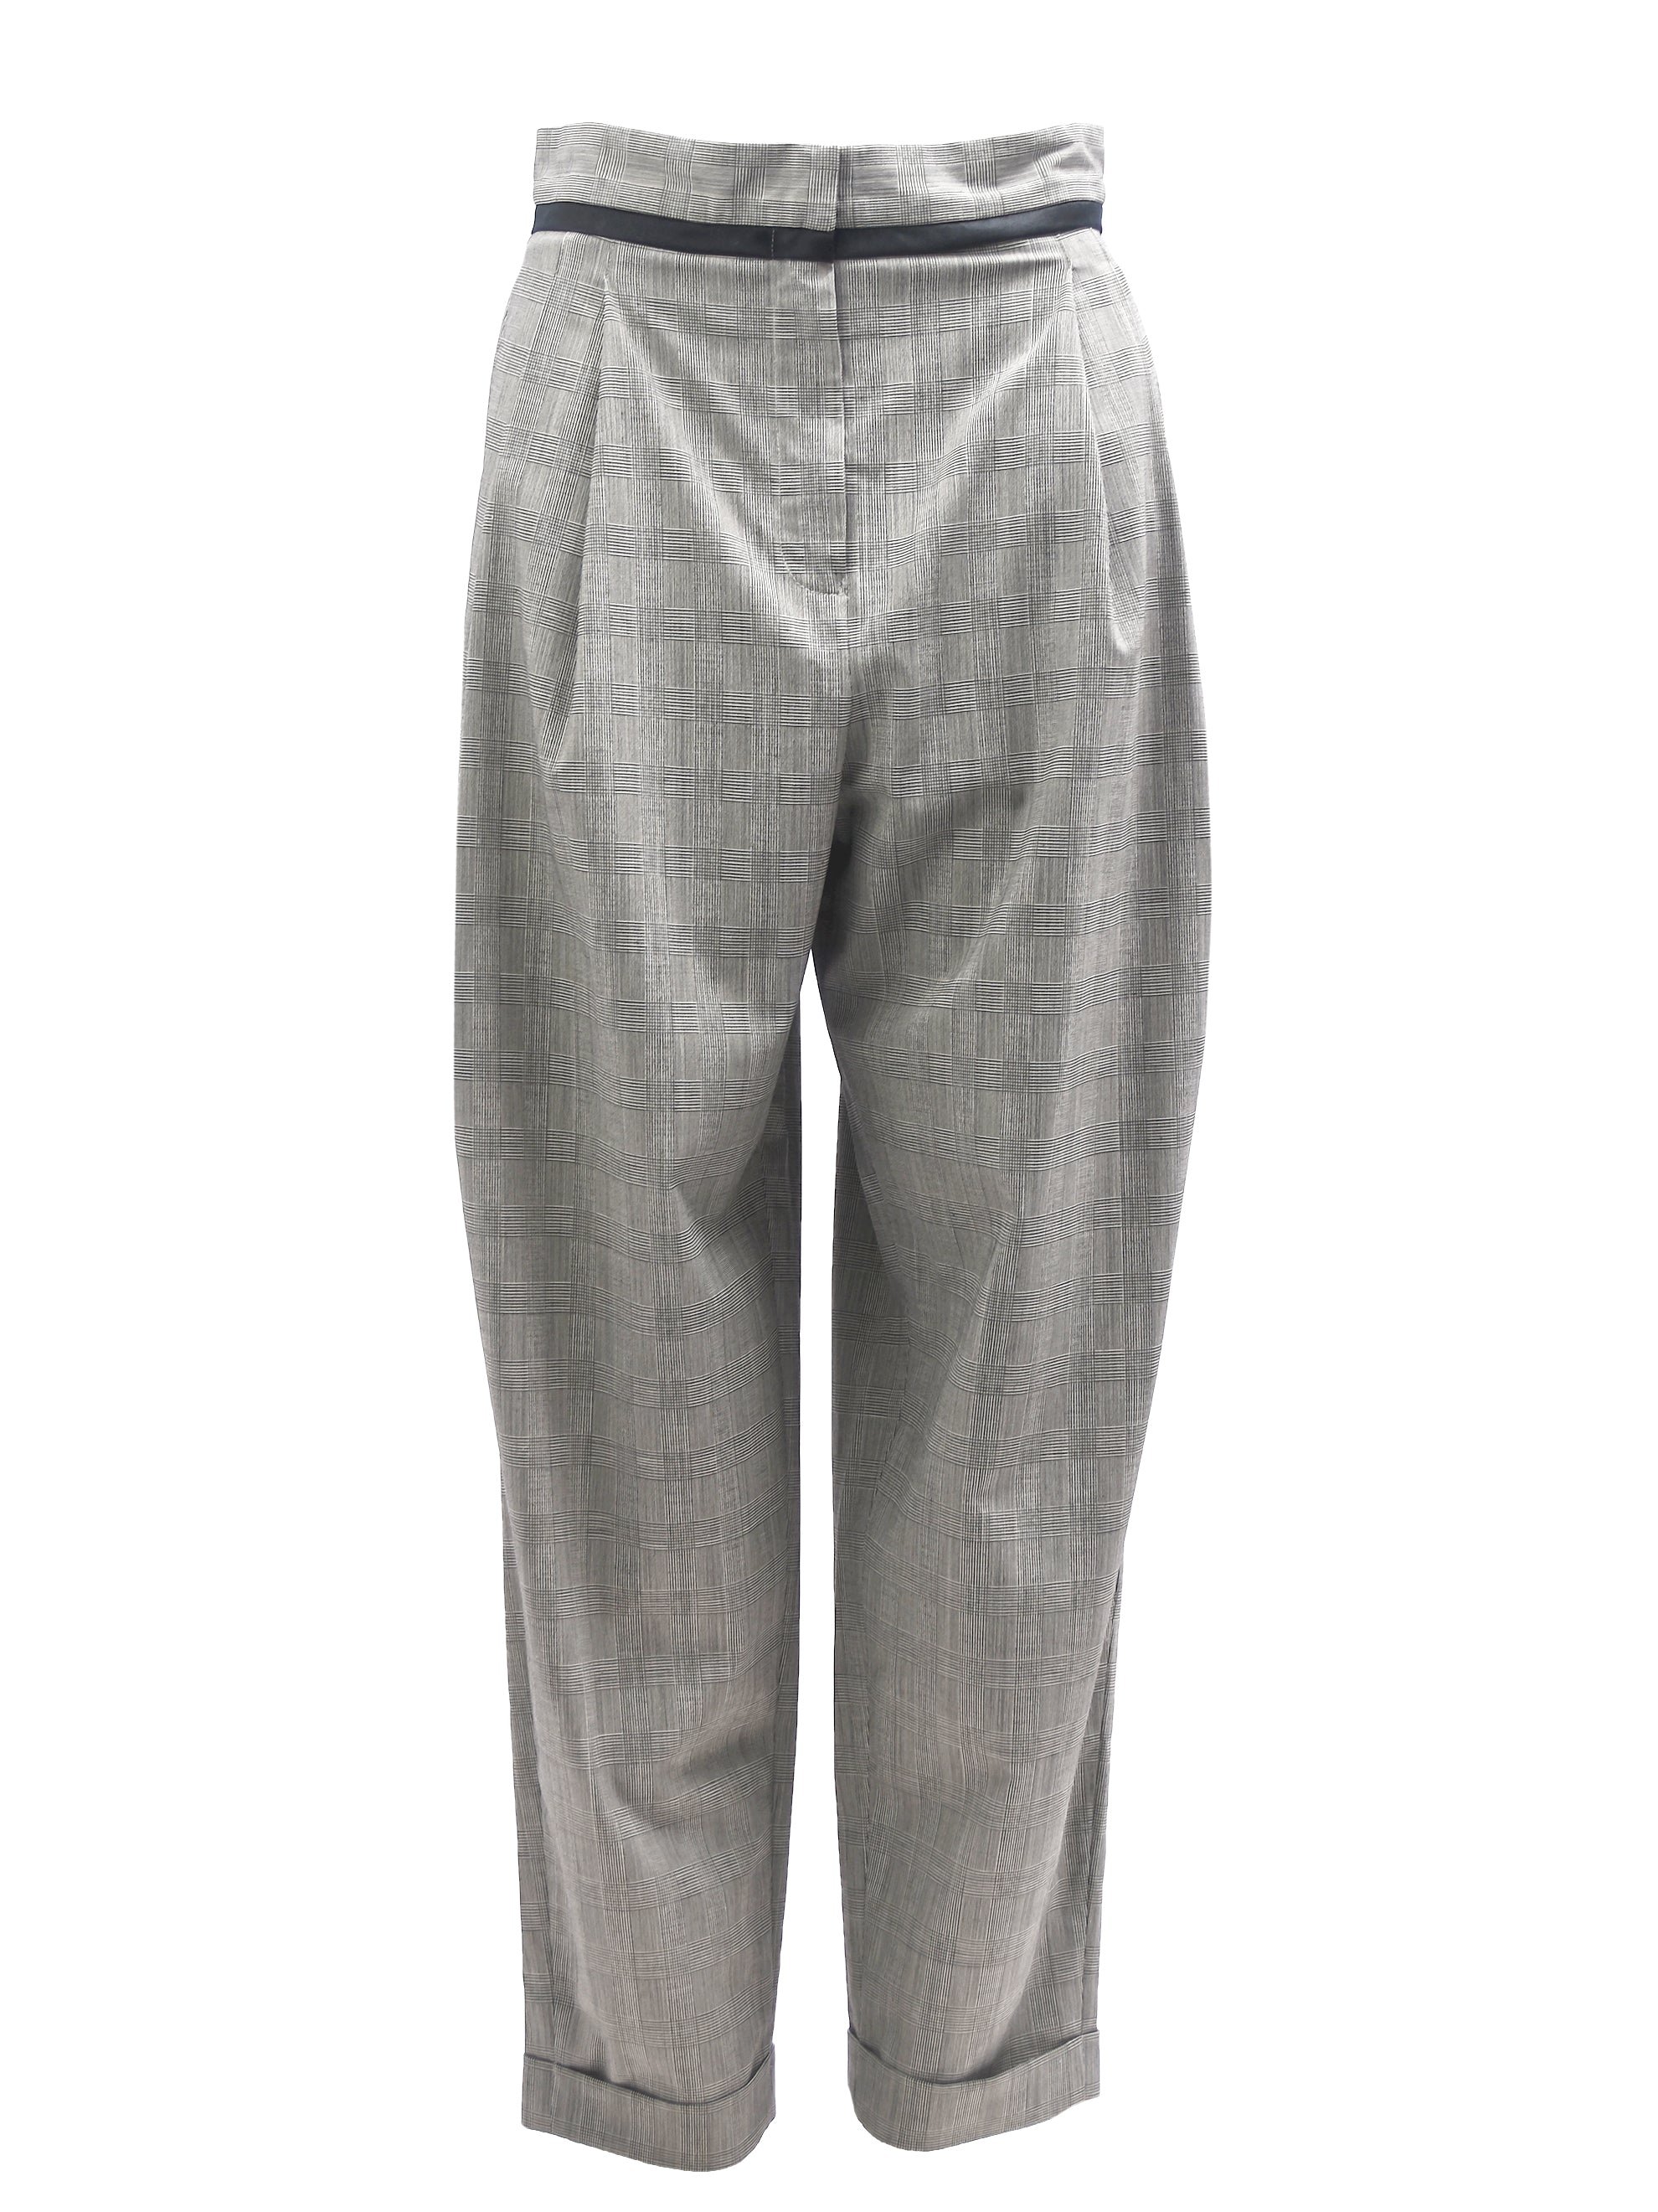 GREY PLAID TAPERED TROUSERS